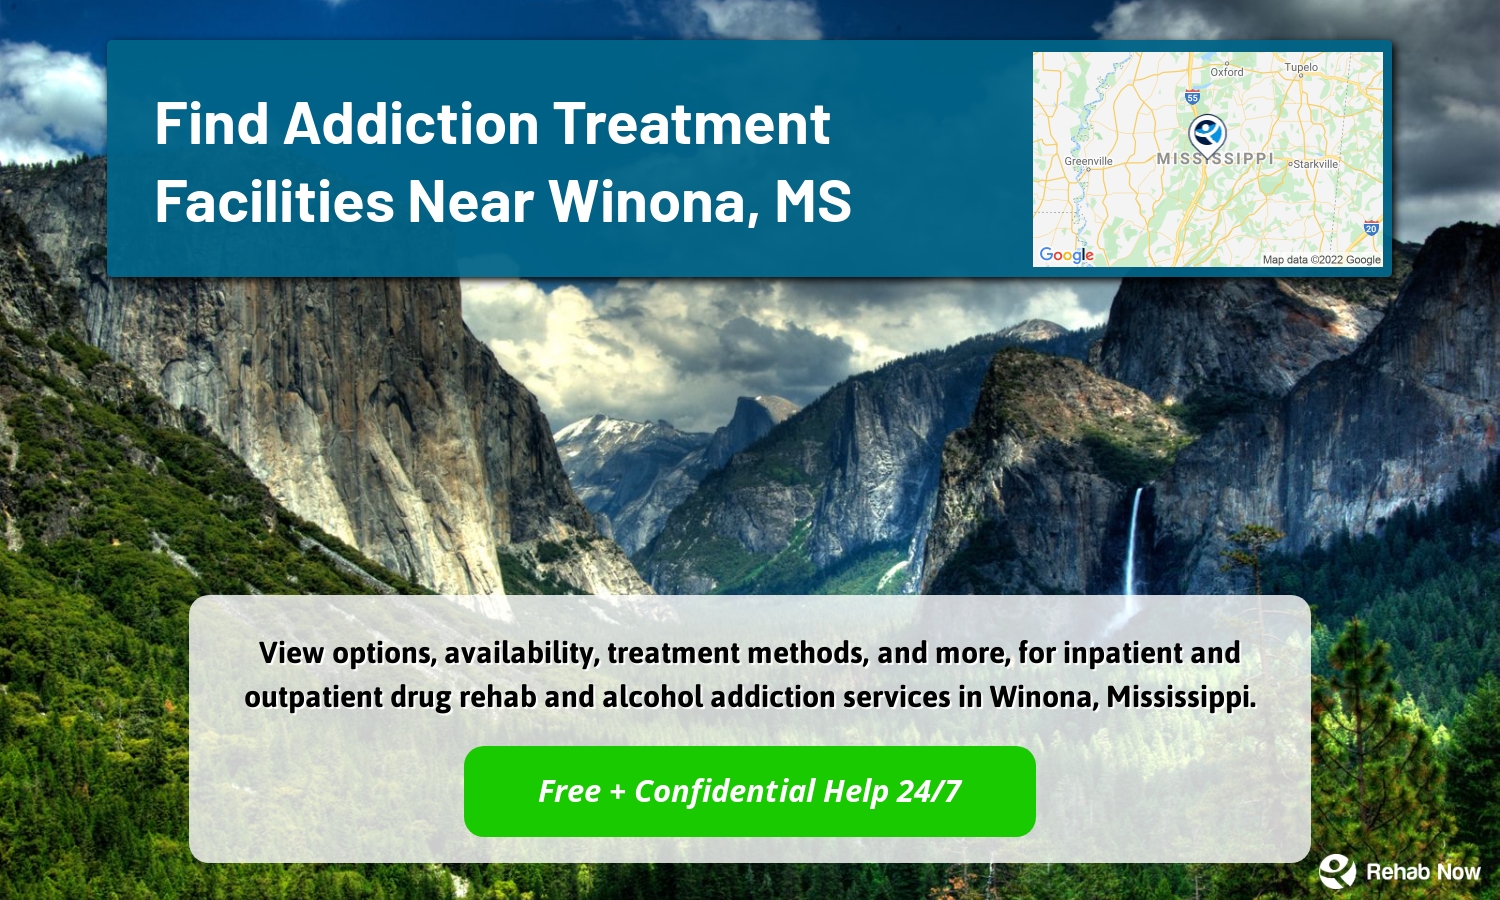 View options, availability, treatment methods, and more, for inpatient and outpatient drug rehab and alcohol addiction services in Winona, Mississippi.